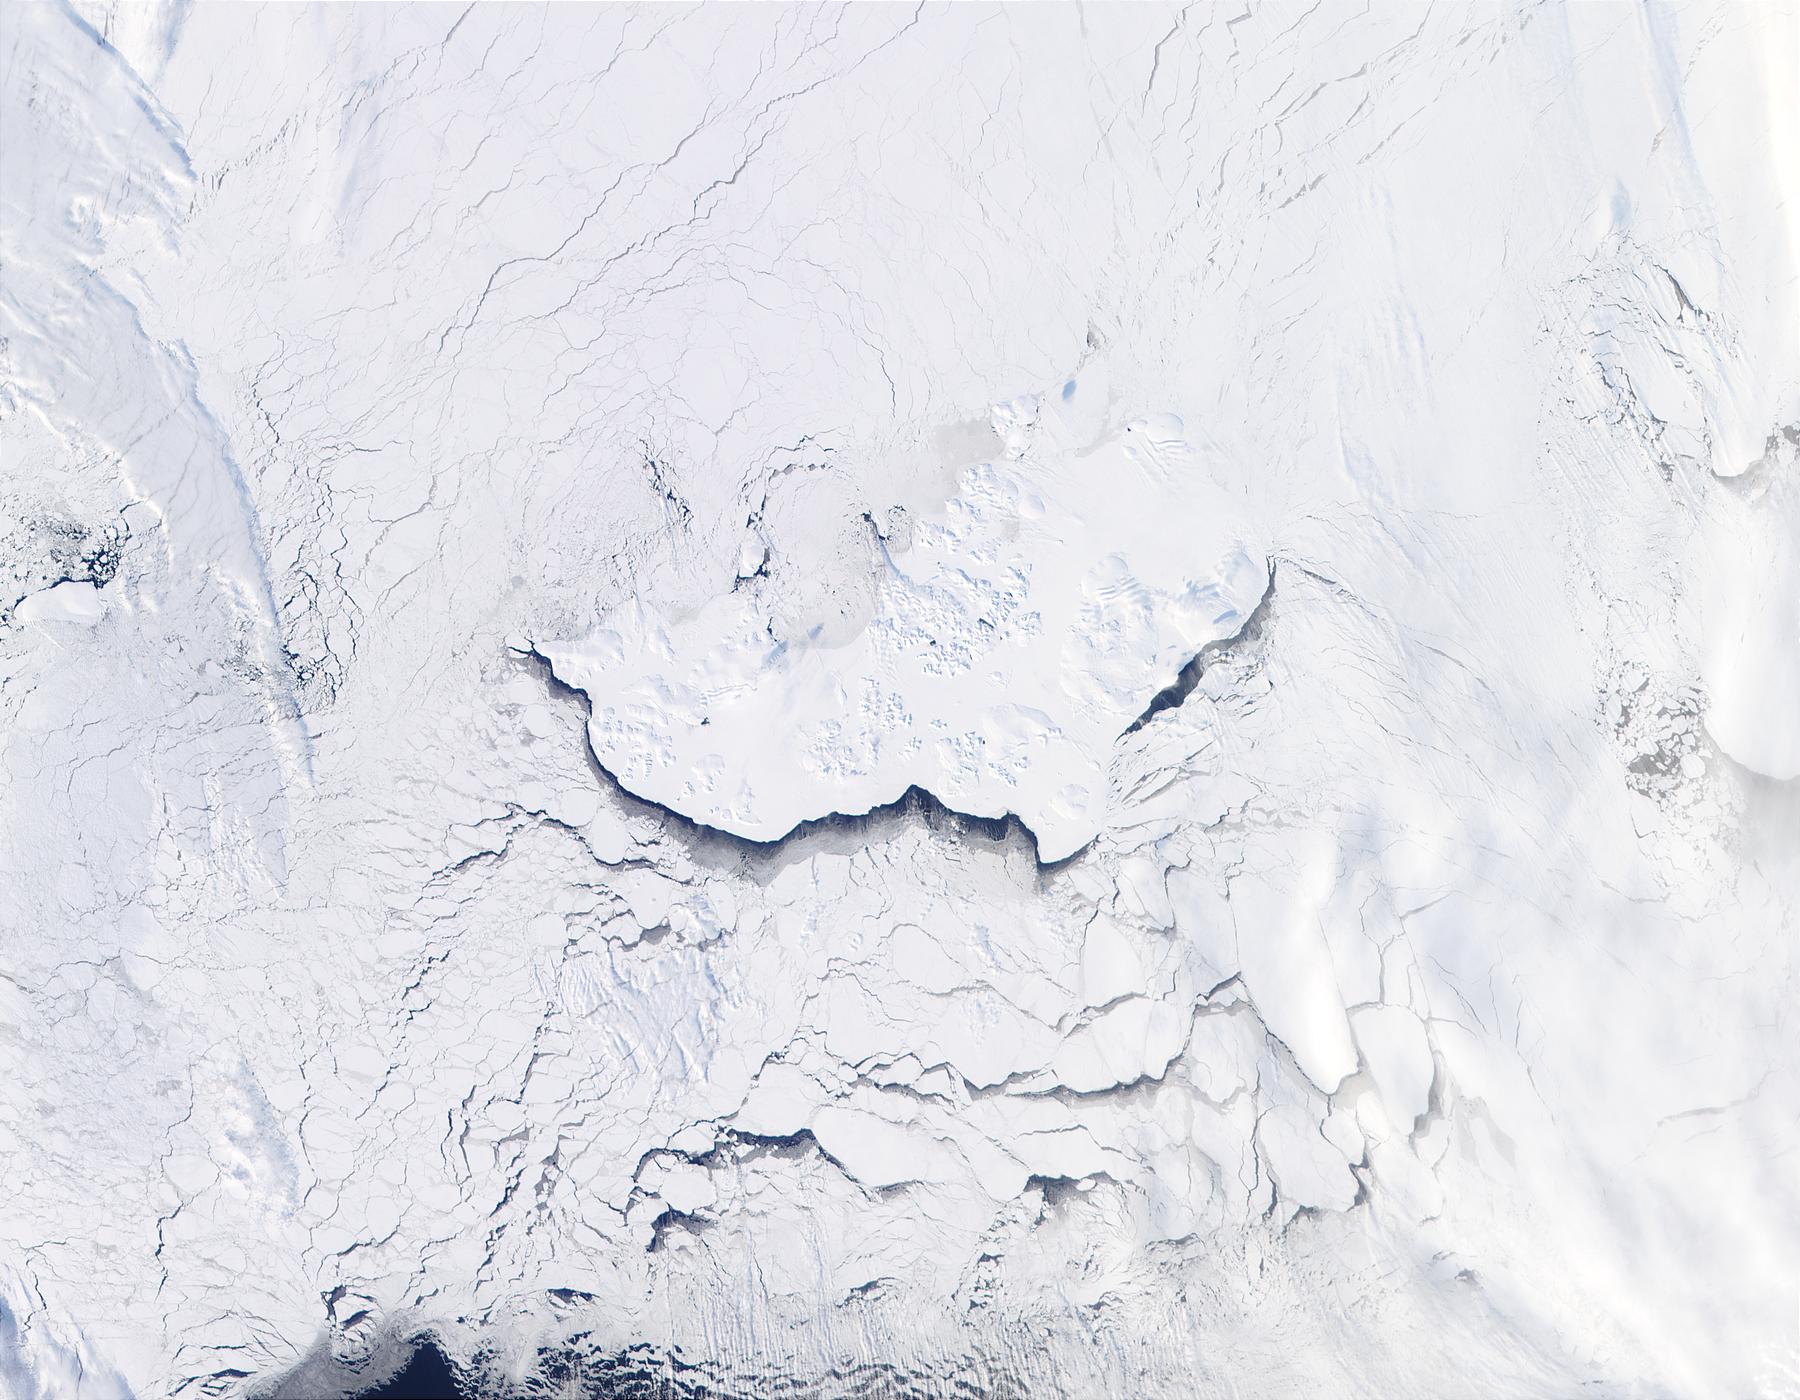 Franz Josef Land, Arctic Ocean - related image preview